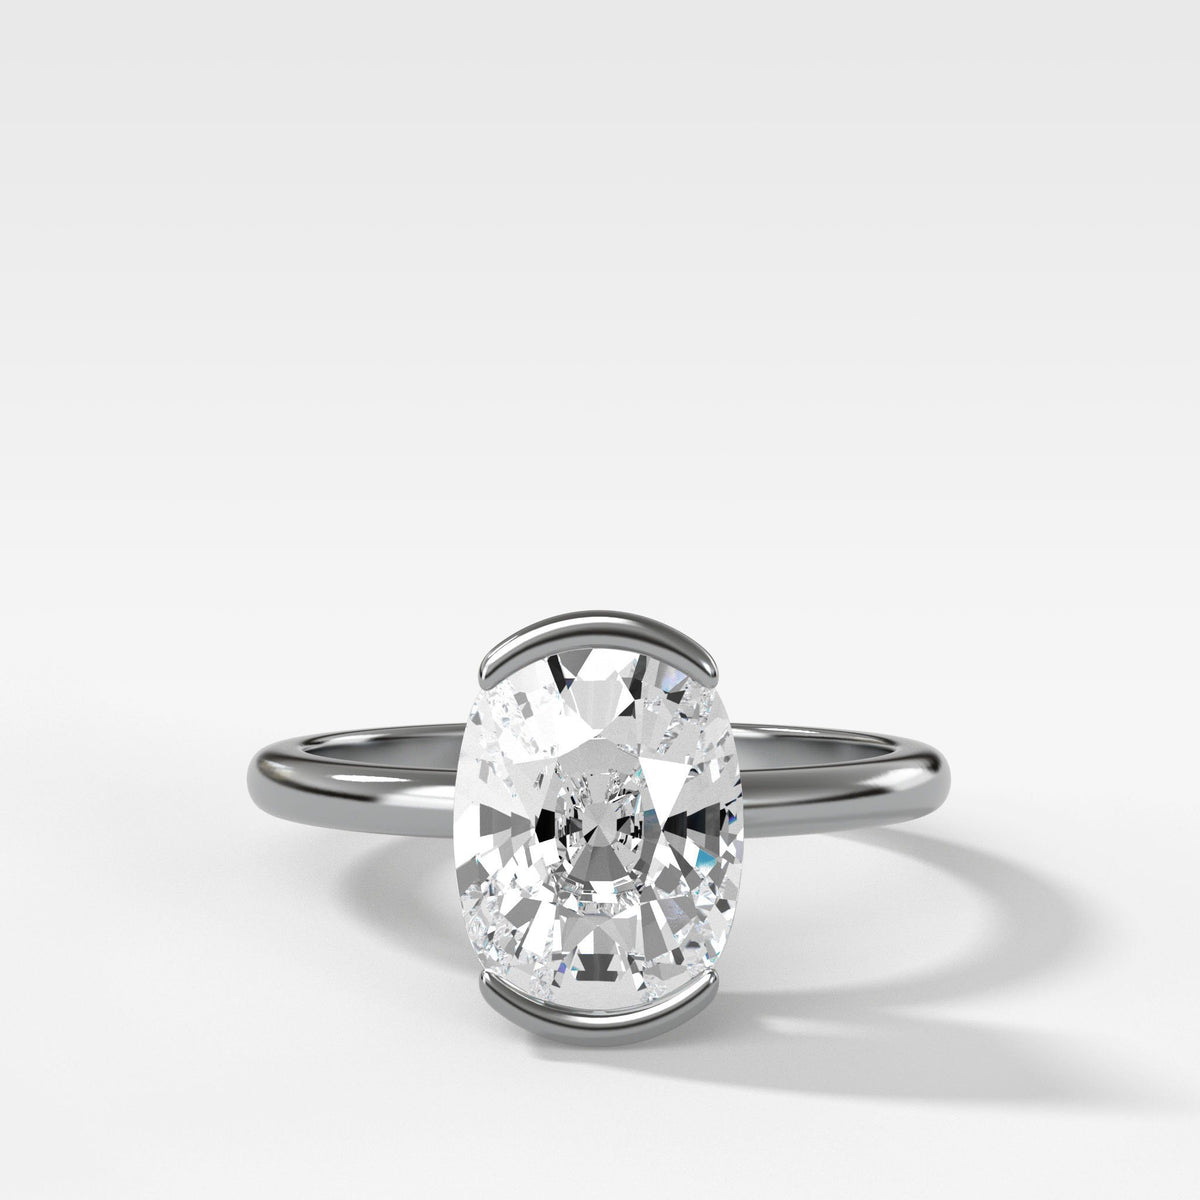 North South Half Bezel Solitaire Engagement Ring With Elongated Cushion Cut by Good Stone in White Gold